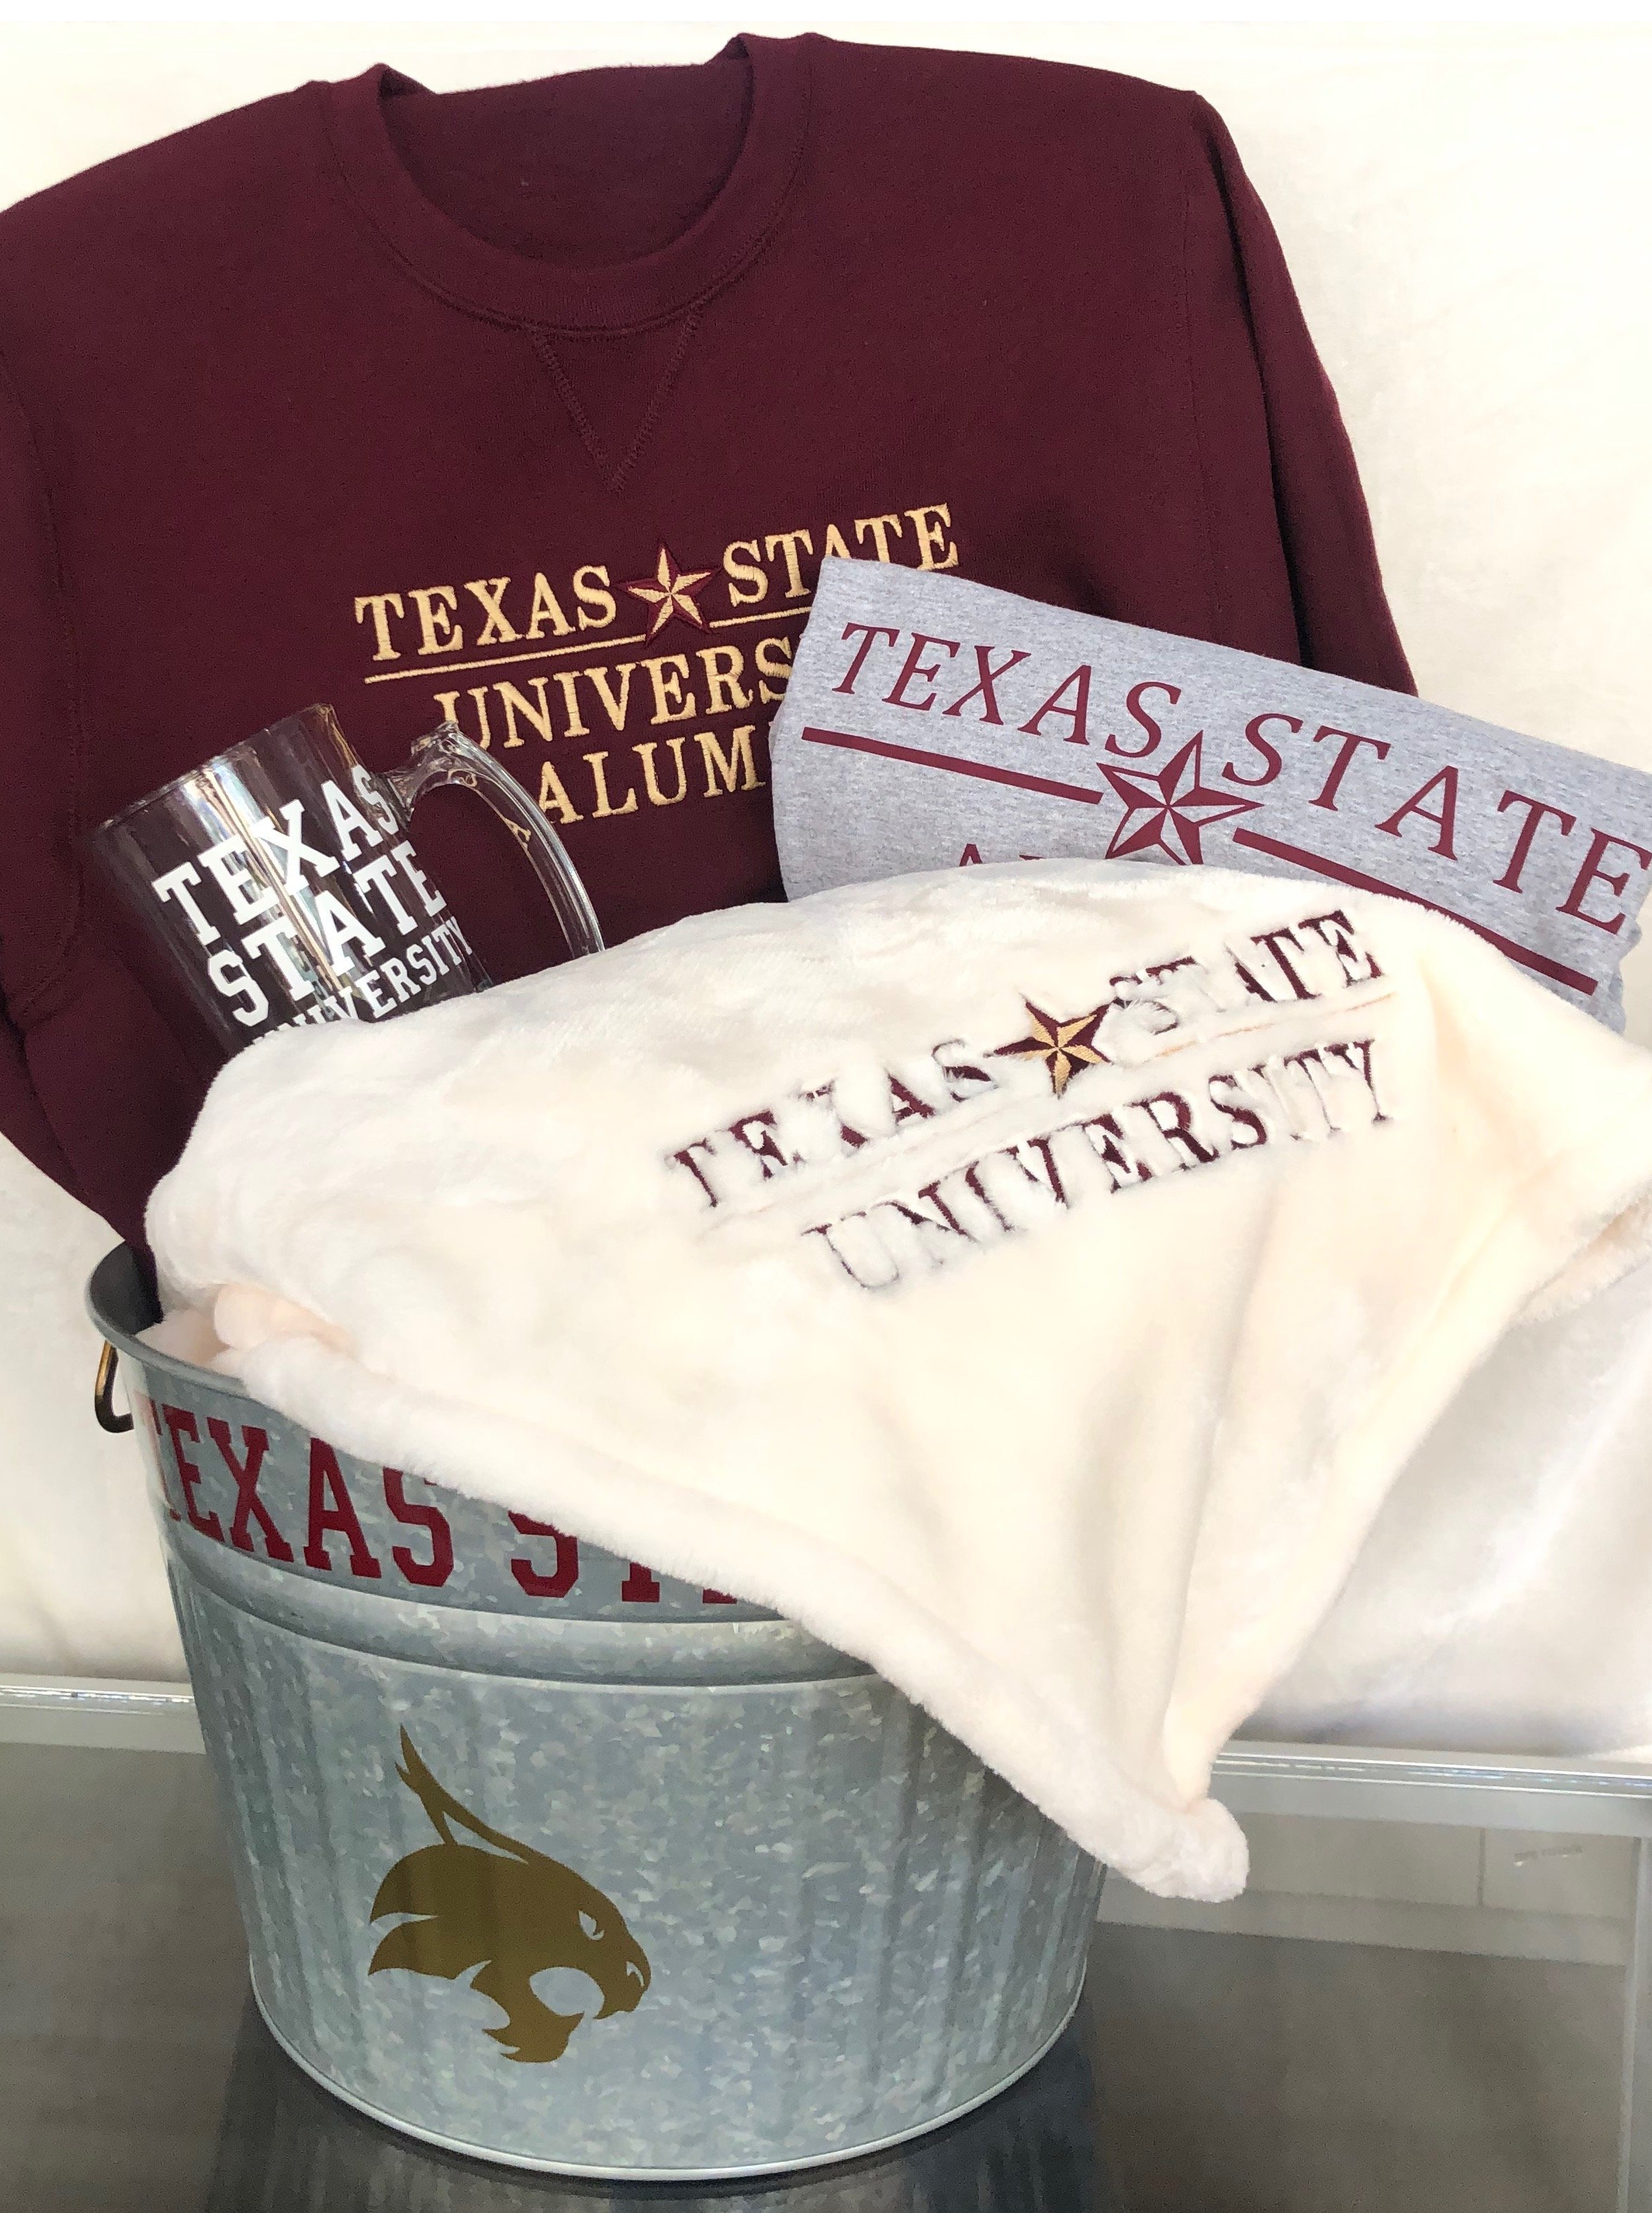 Texas State University TXST Graduation Package